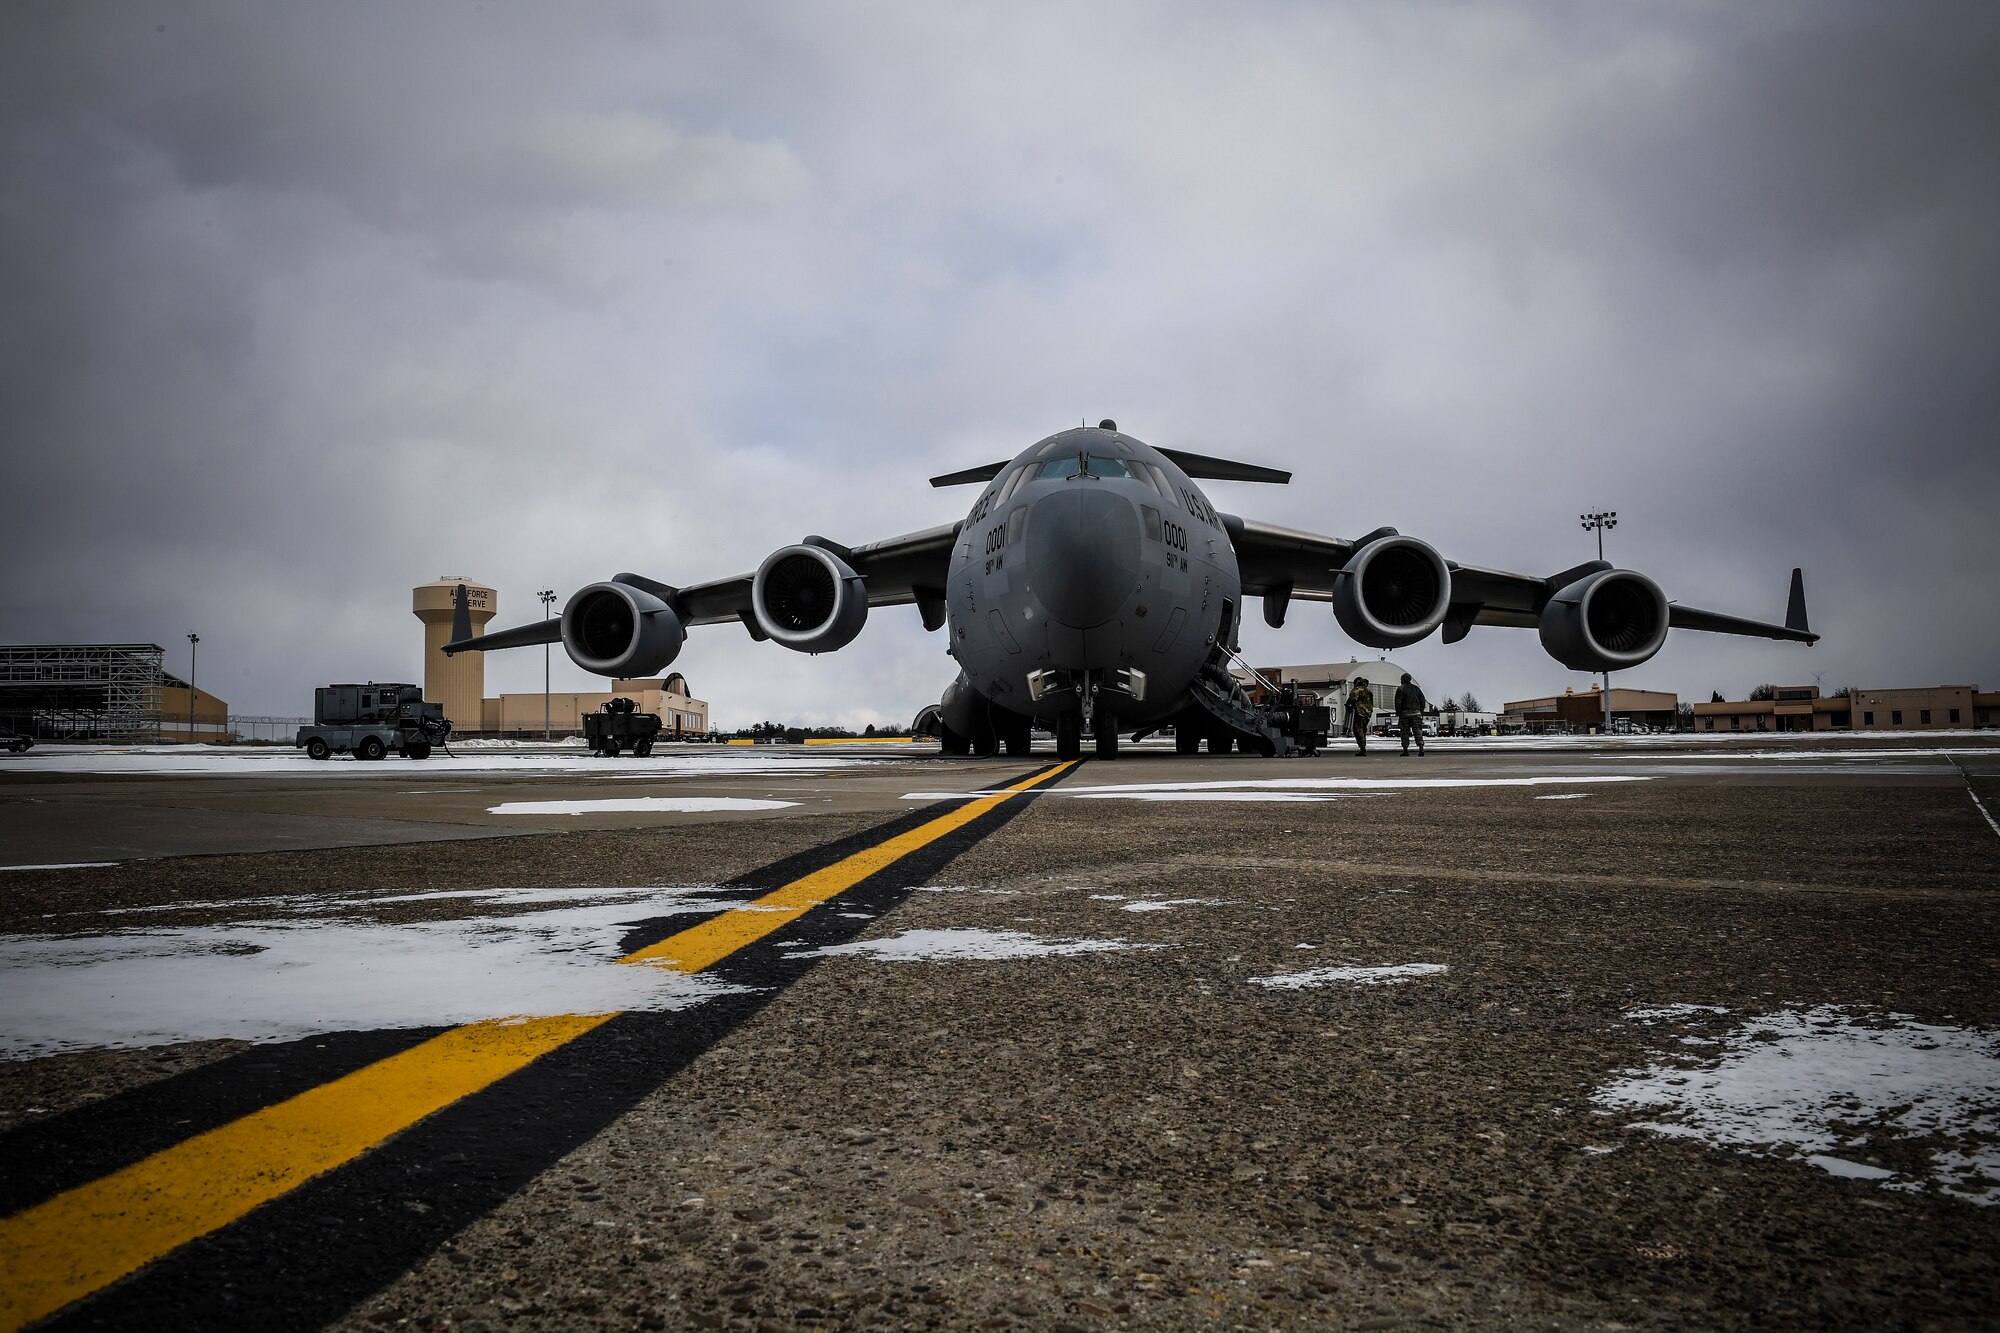 A C-17 Globemaster III aircraft assigned to the 911th Airlift Wing sits on the flightline at Pittsburgh International Airport Air Reserve Station, Pennsylvania, January 30, 2019. The C-17 Globemaster III is the most flexible cargo aircraft within the airlift force. It is capable of rapid strategic delivery of troops and all types of cargo to main operating bases or directly to forward bases in deployed locations and has a maximum payload capacity of 170,900 pounds. (U.S. Air Force photo by Joshua J. Seybert)